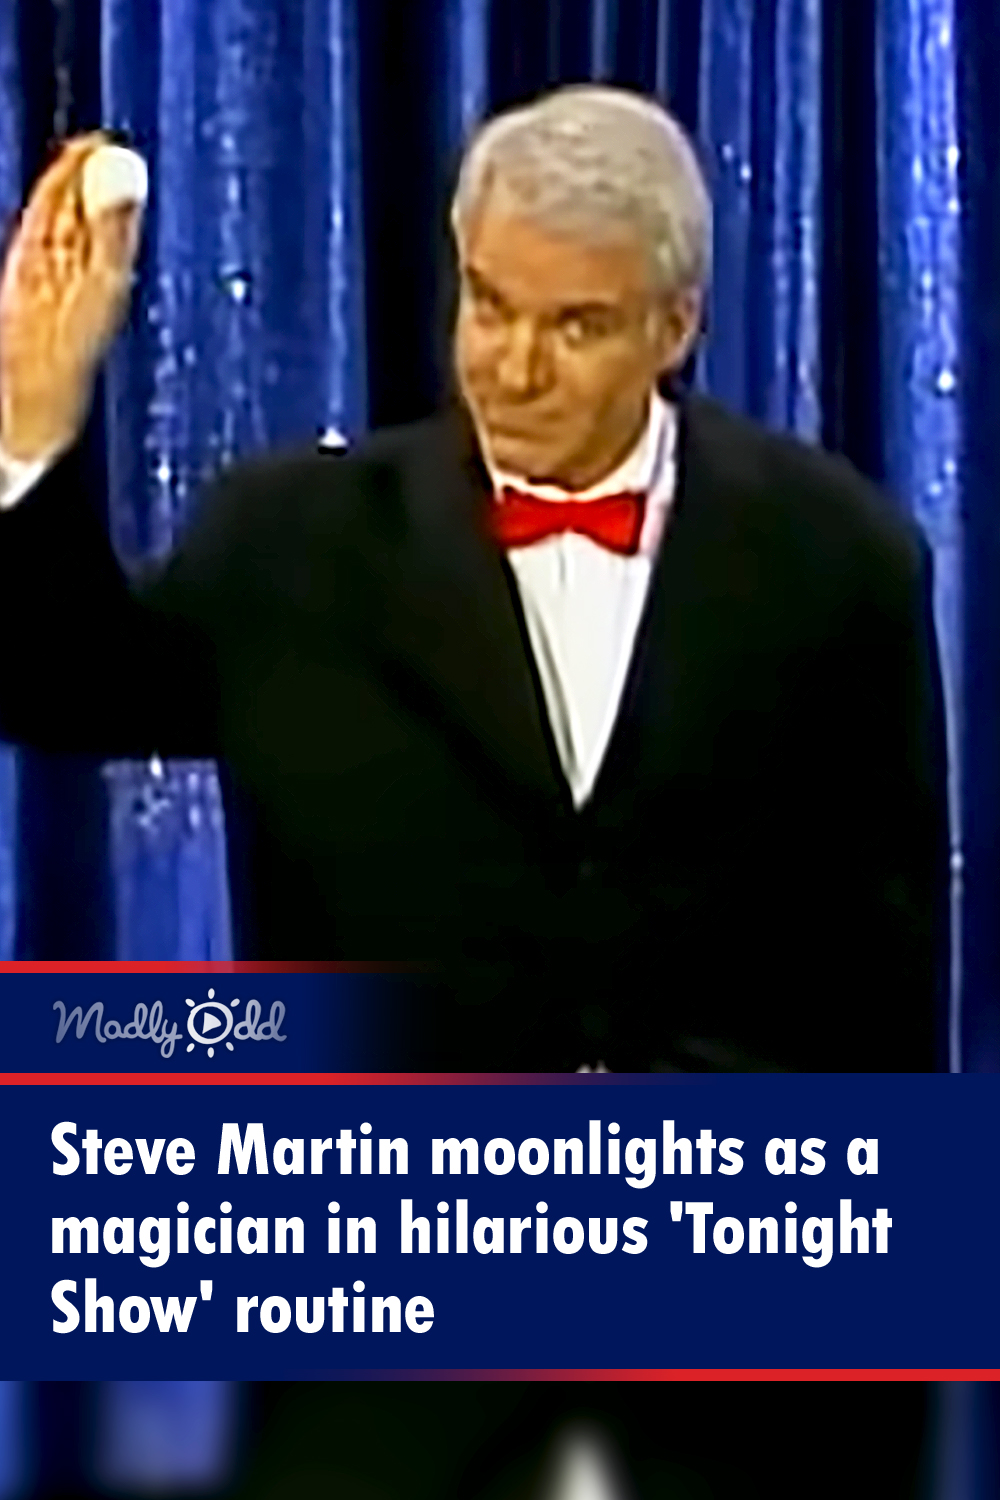 Steve Martin moonlights as a magician in hilarious \'Tonight Show\' routine